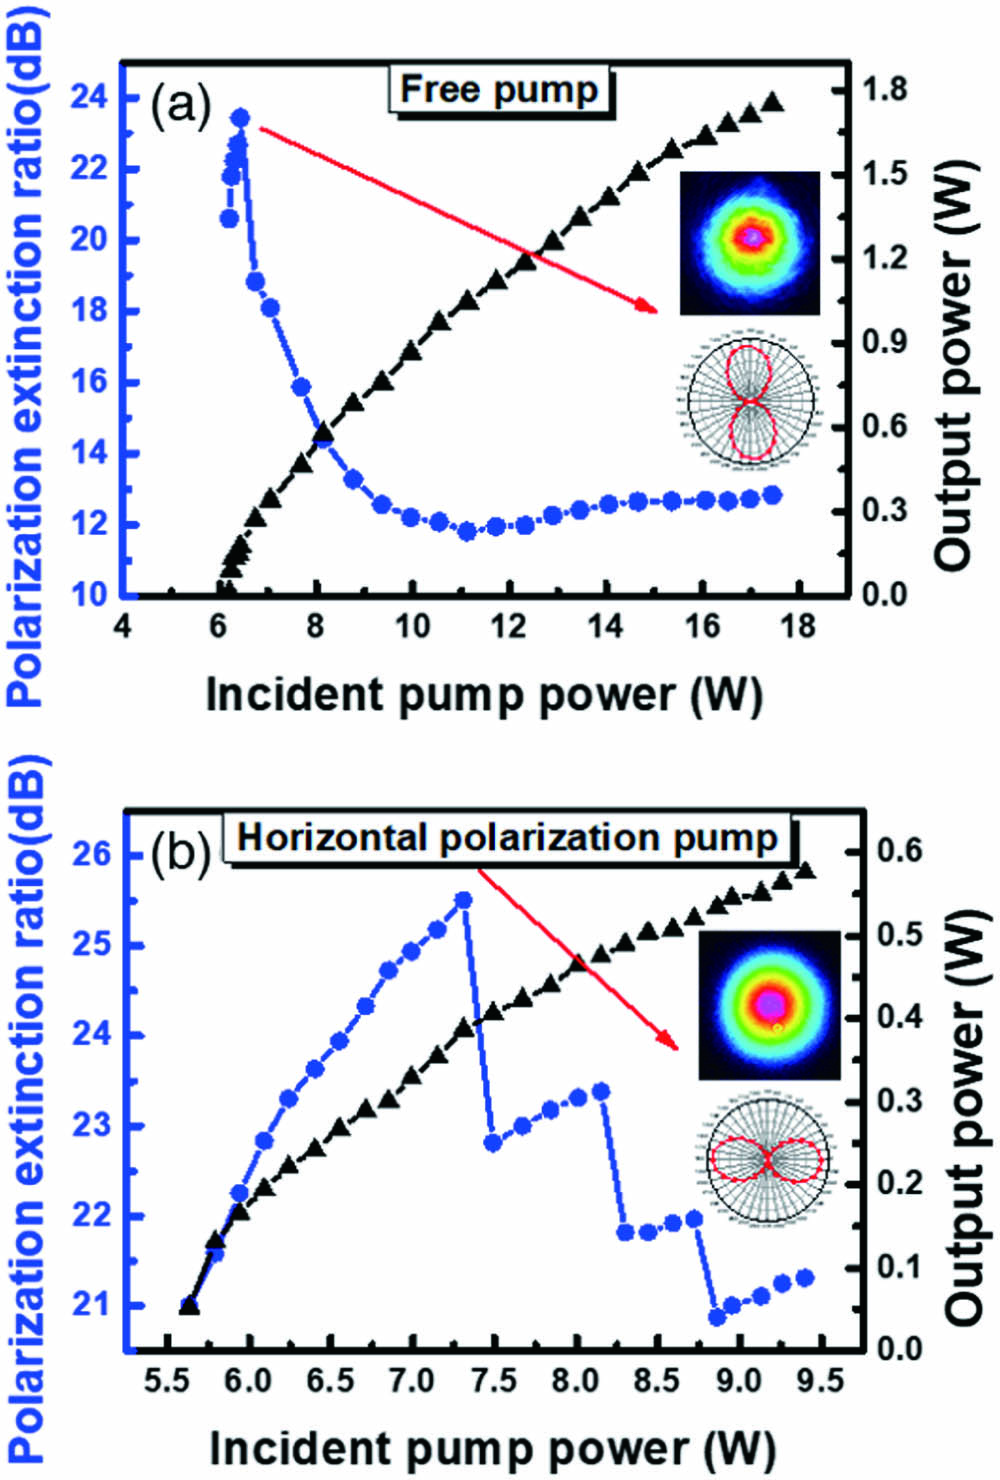 Output power and polarization extinction ratio (PER) as functions of the incident pump power under (a) free pump and (b) horizontal polarization pump. Insets show the polarization directions and beam profiles when the Glan prism was along the polarization directions.